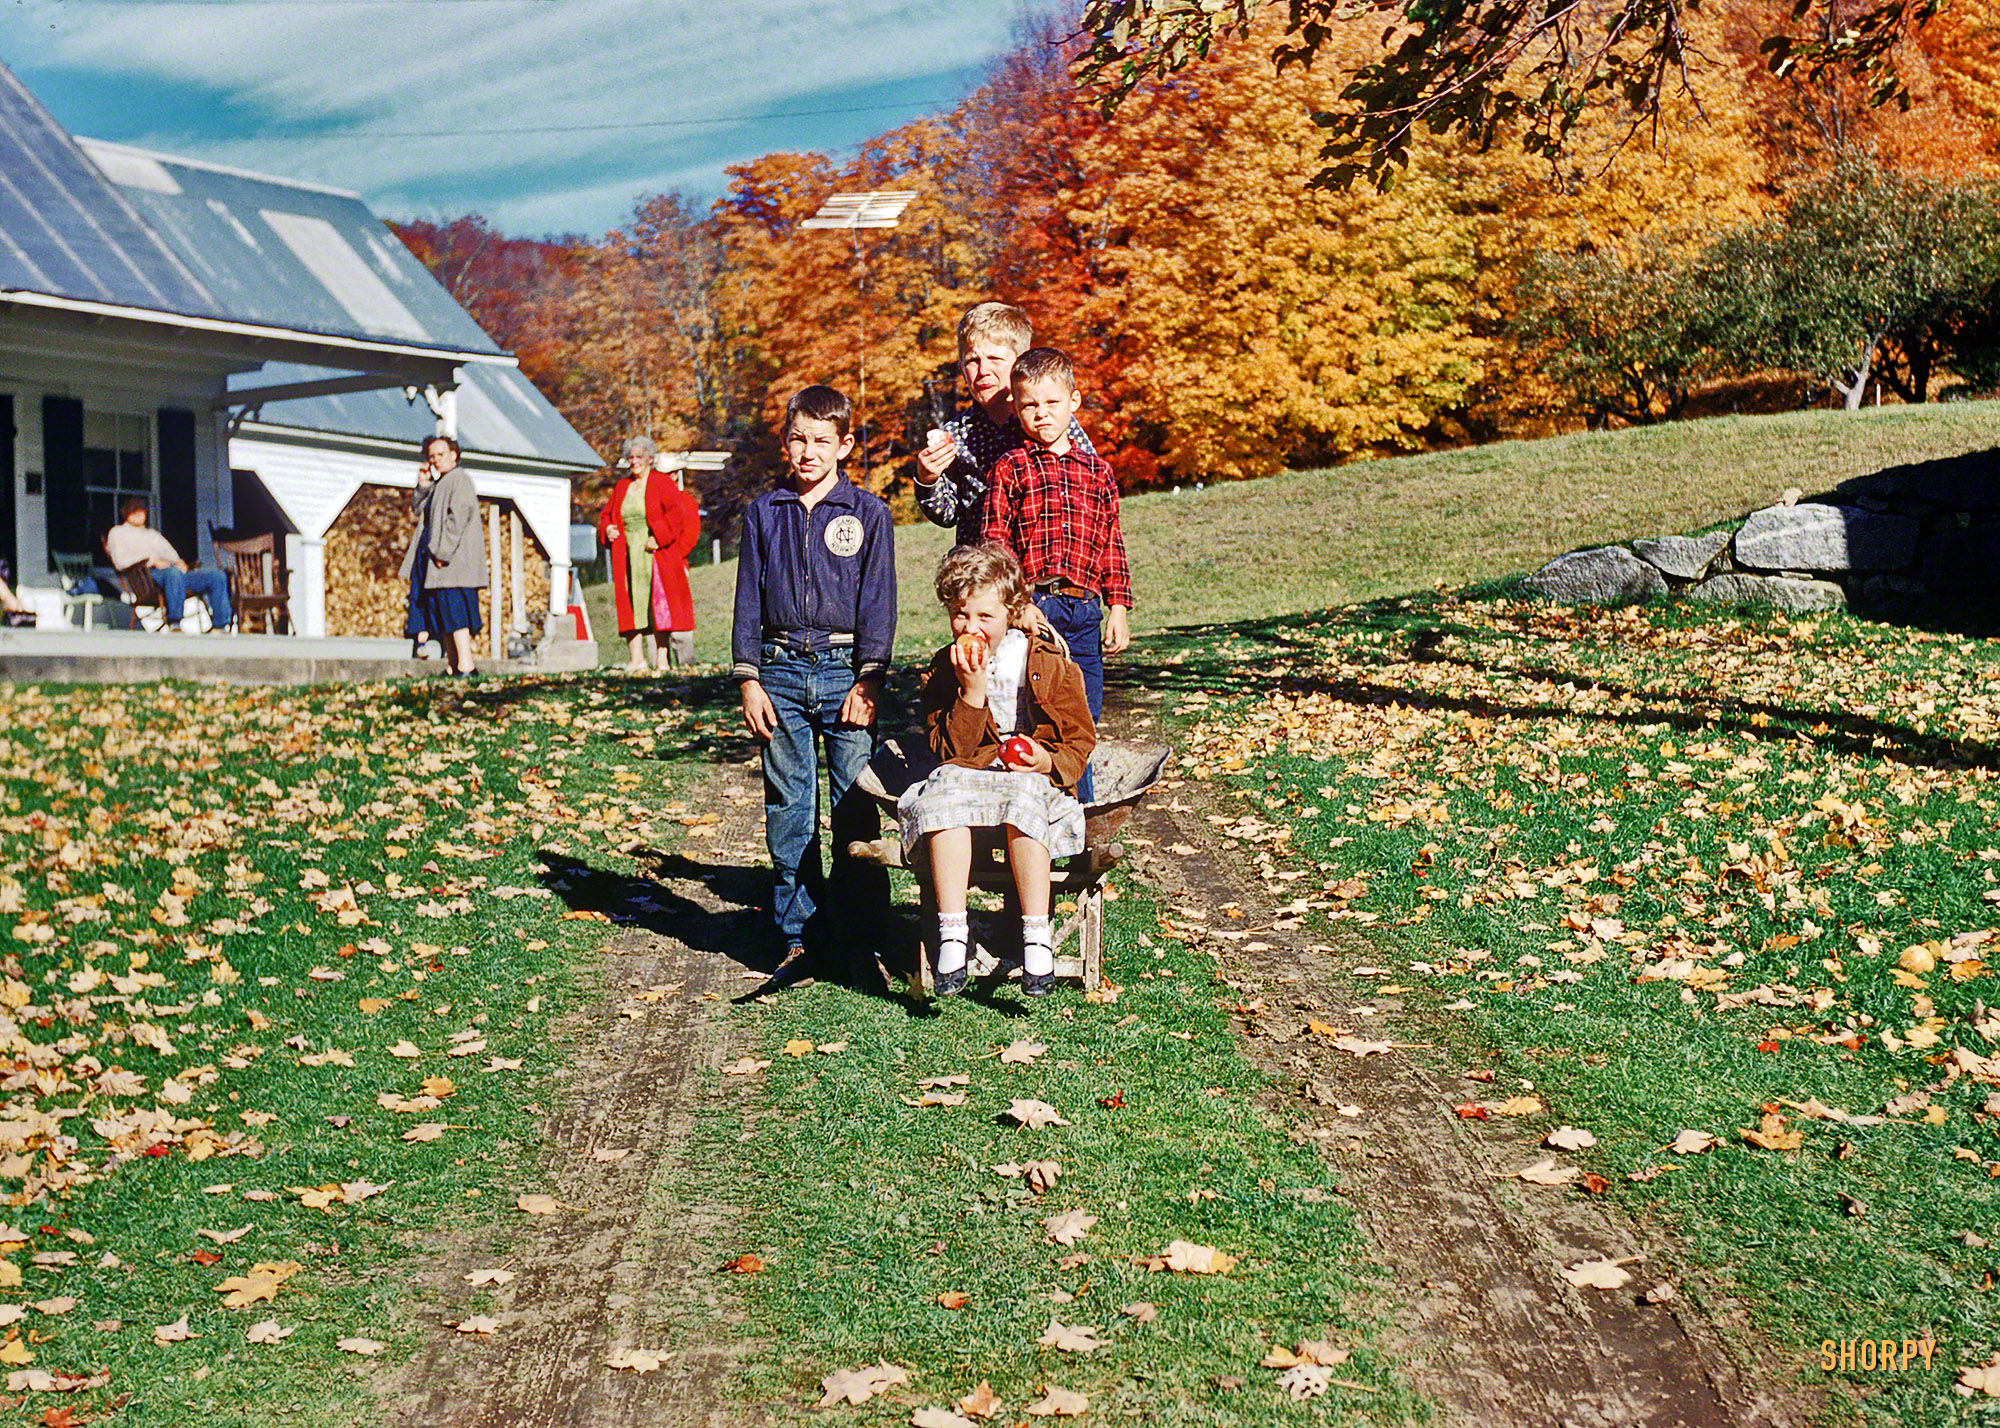 From around 1954, somewhere in New England, comes this unlabeled slide in our "Linda" series of Kodachromes found on eBay. The weather is crisp and so are the apples! View full size.